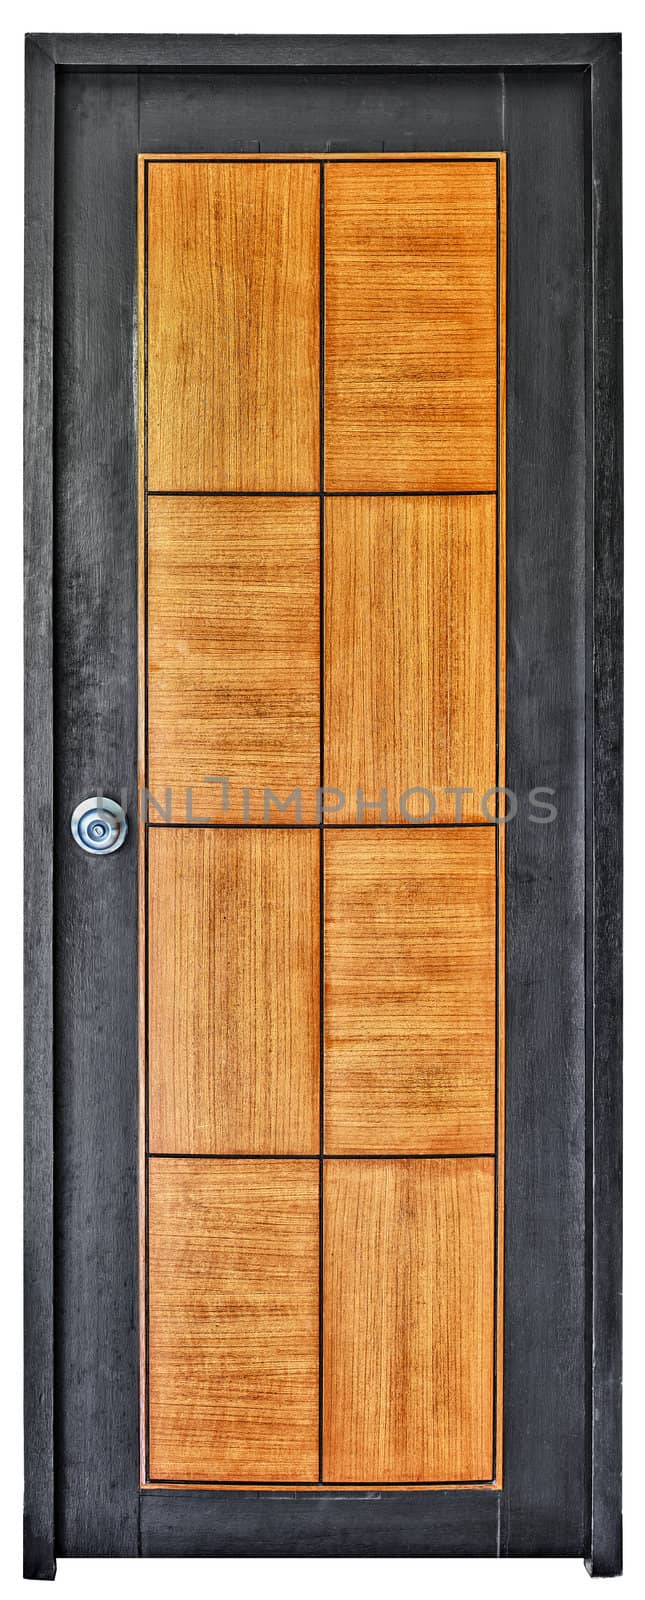 Modern wooden door isolated on white by pzaxe